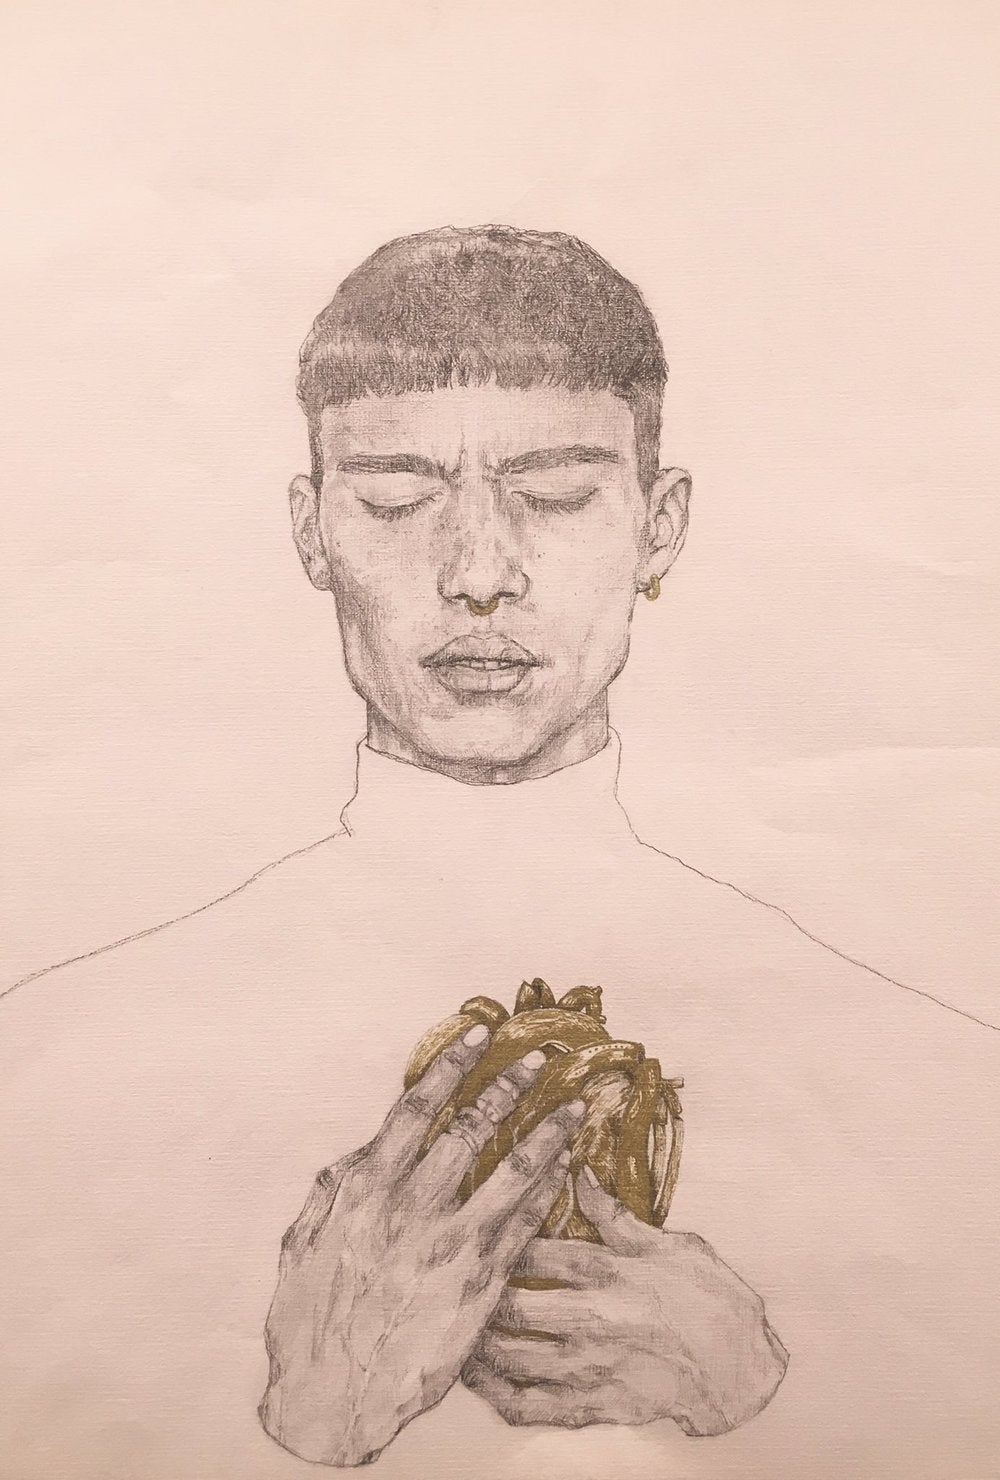 Illustration of person with crop haircut and nose ring, wearing a turtleneck, holding a gold heart